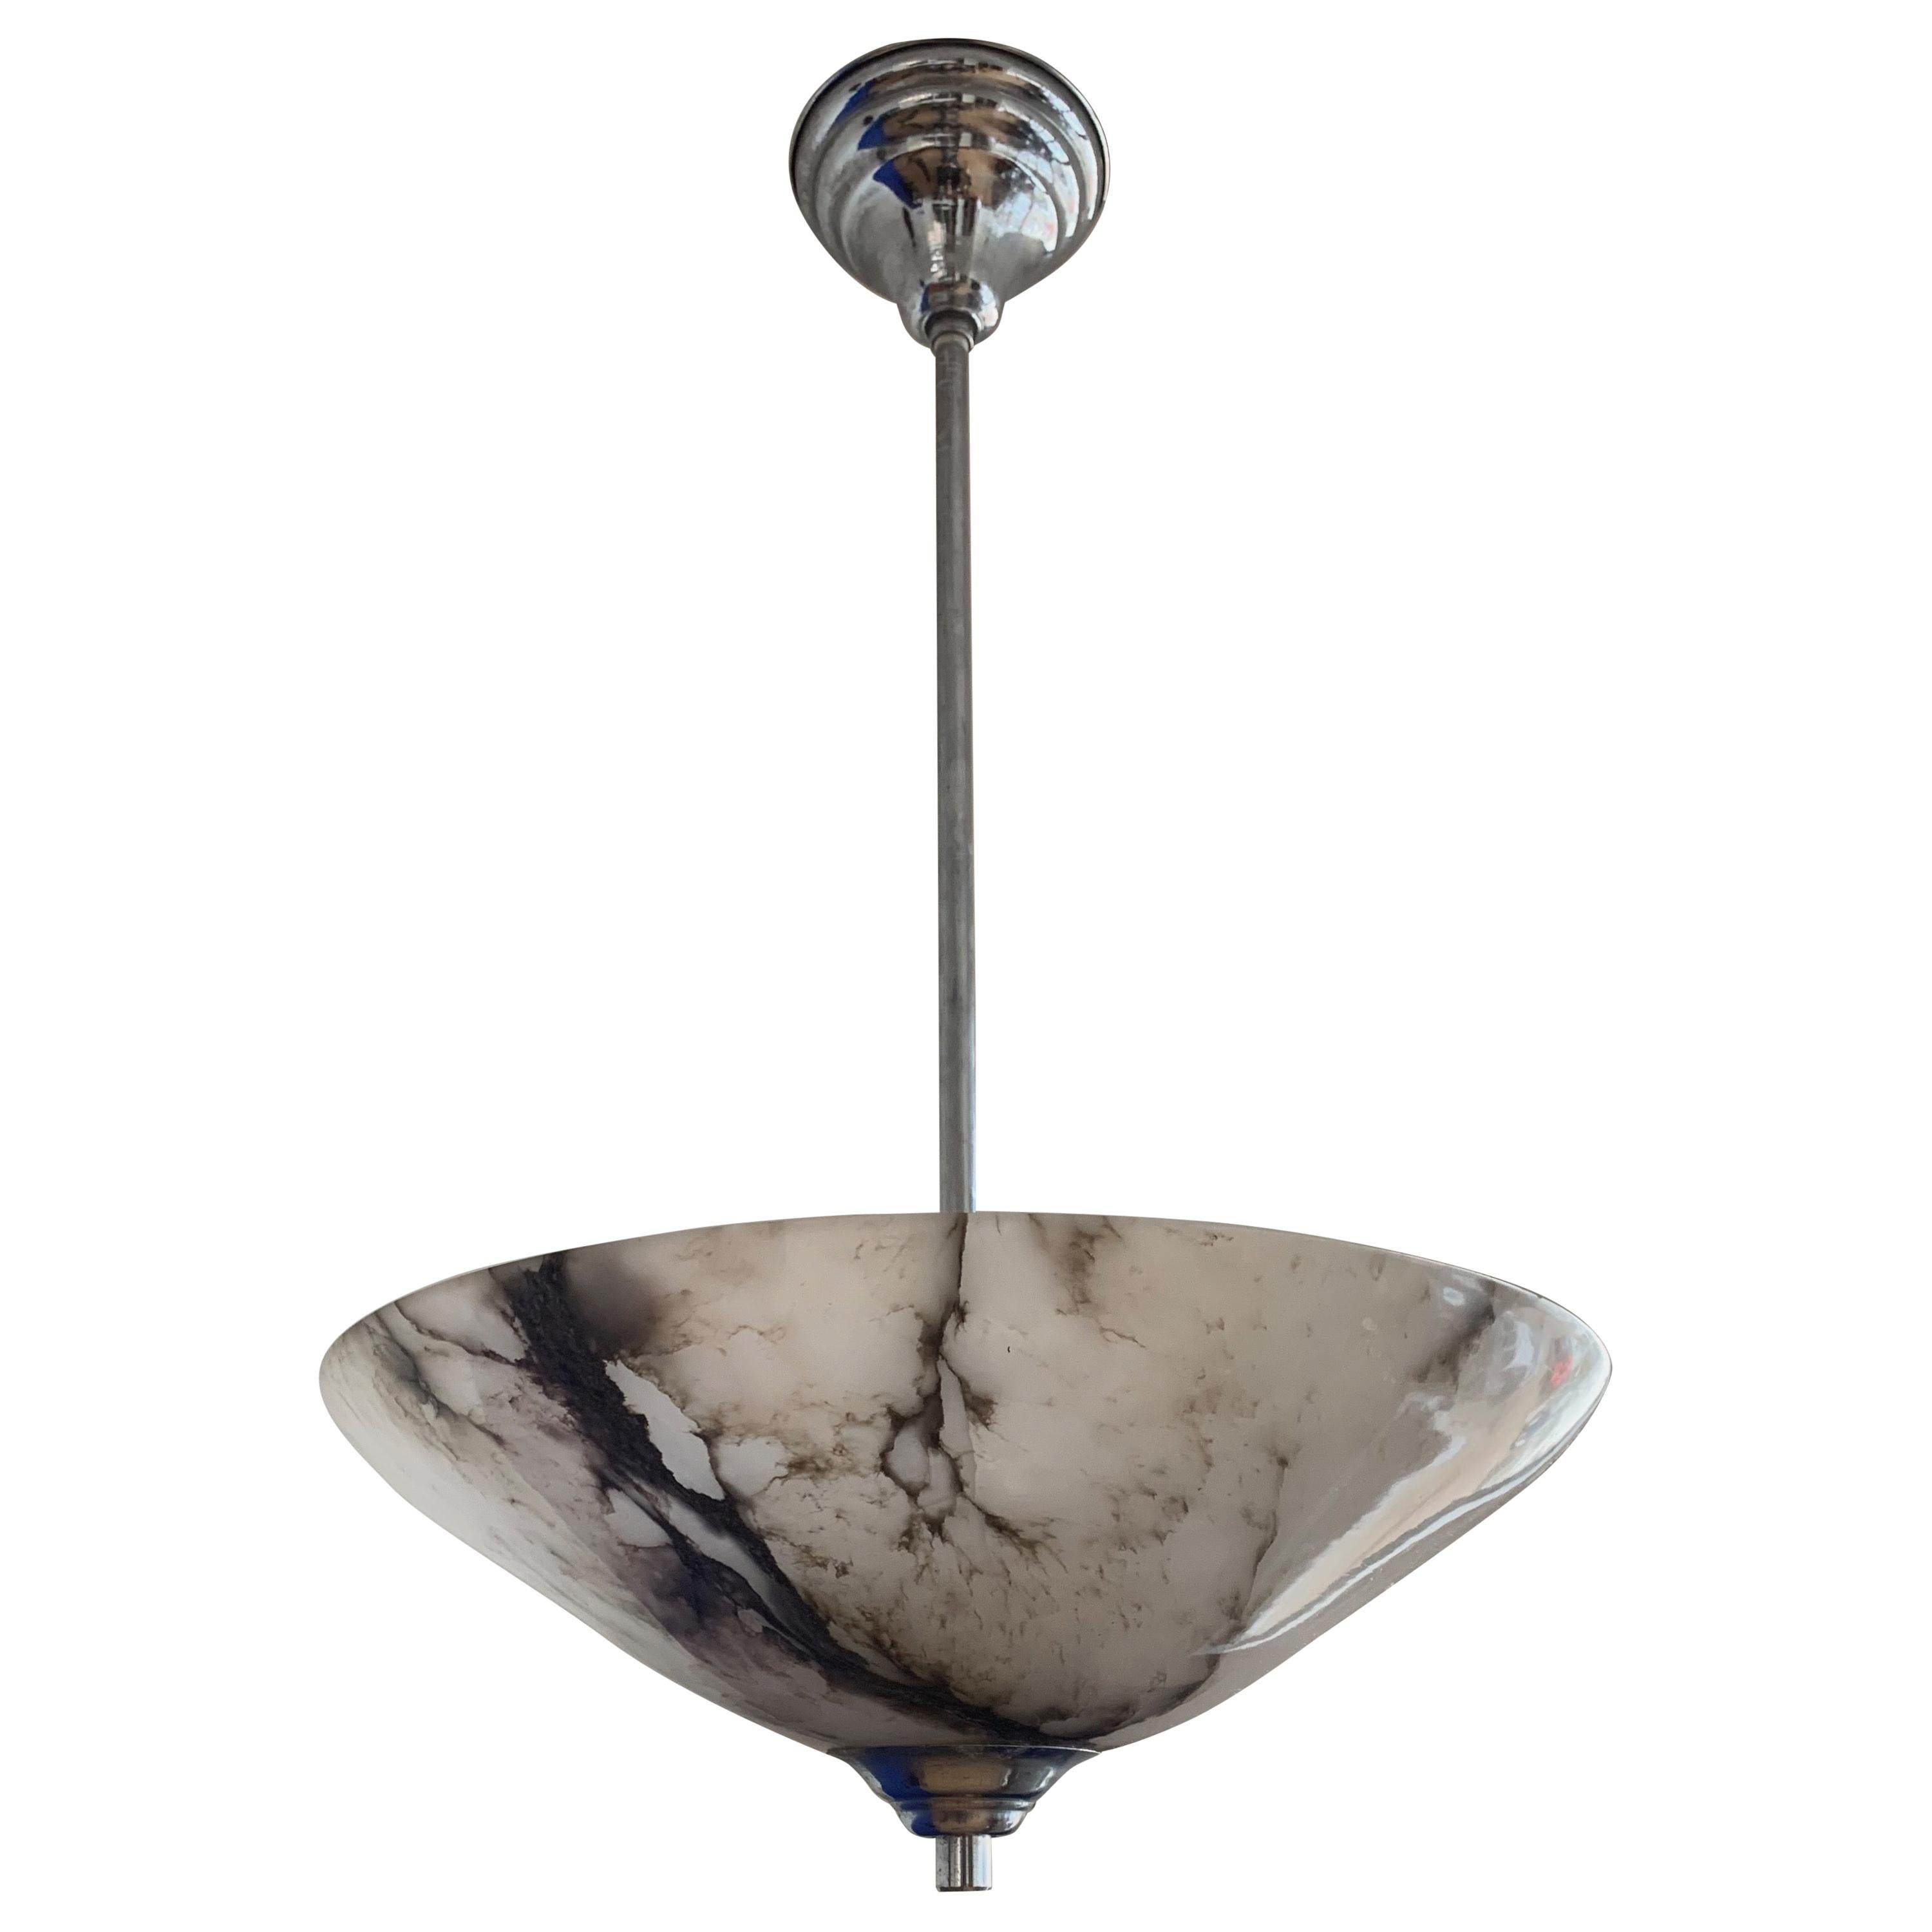 Timeless and very good condition alabaster light fixture.

This wonderfully designed and truly beautiful light fixture has been very well looked after by its former owners. This great design, single antique alabaster shade with chrome hardware is